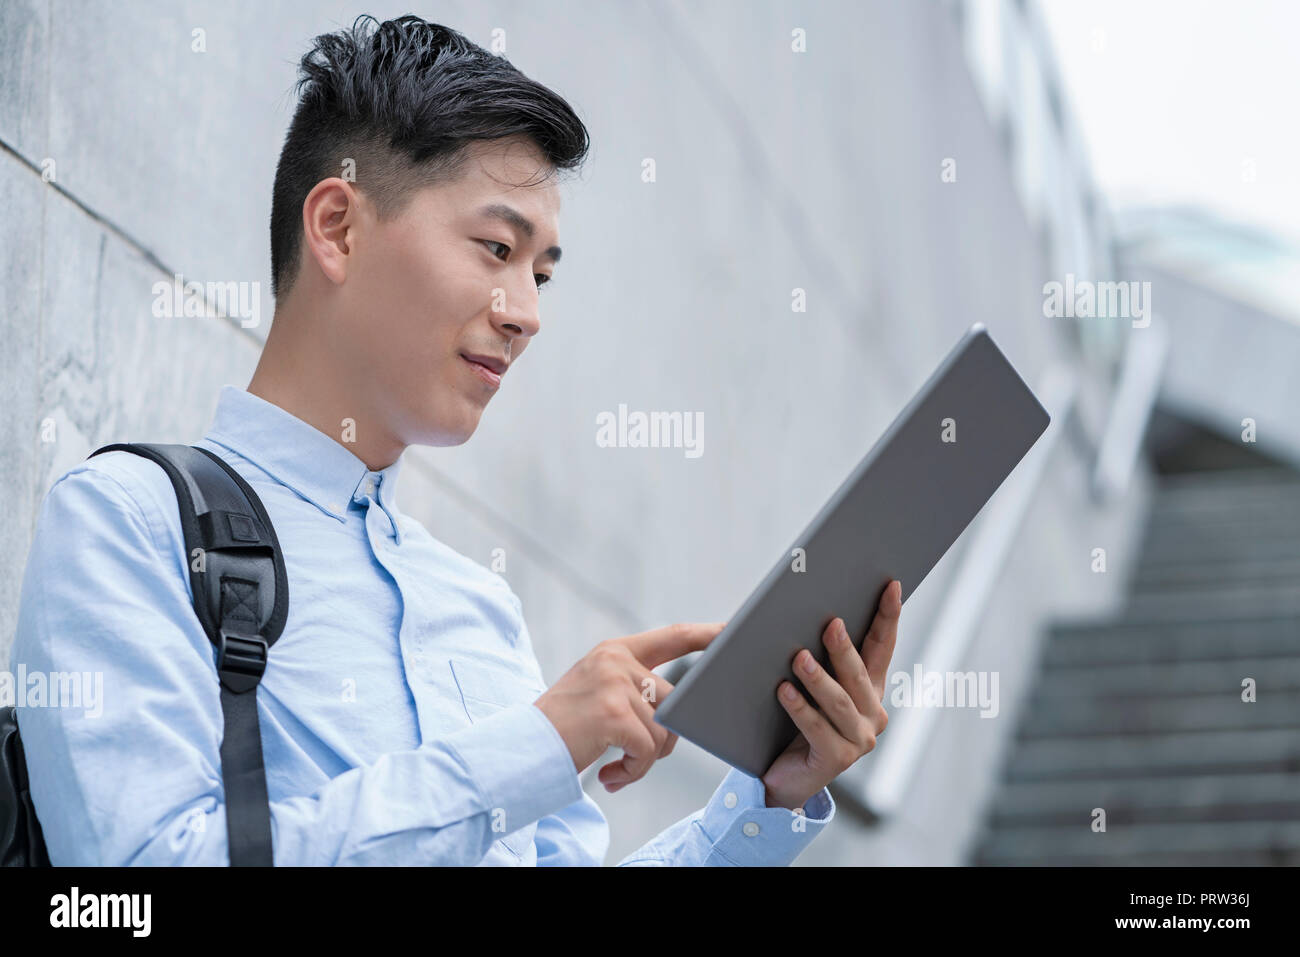 Young businessman using digital tablet on city stairway, Shanghai, China Stock Photo